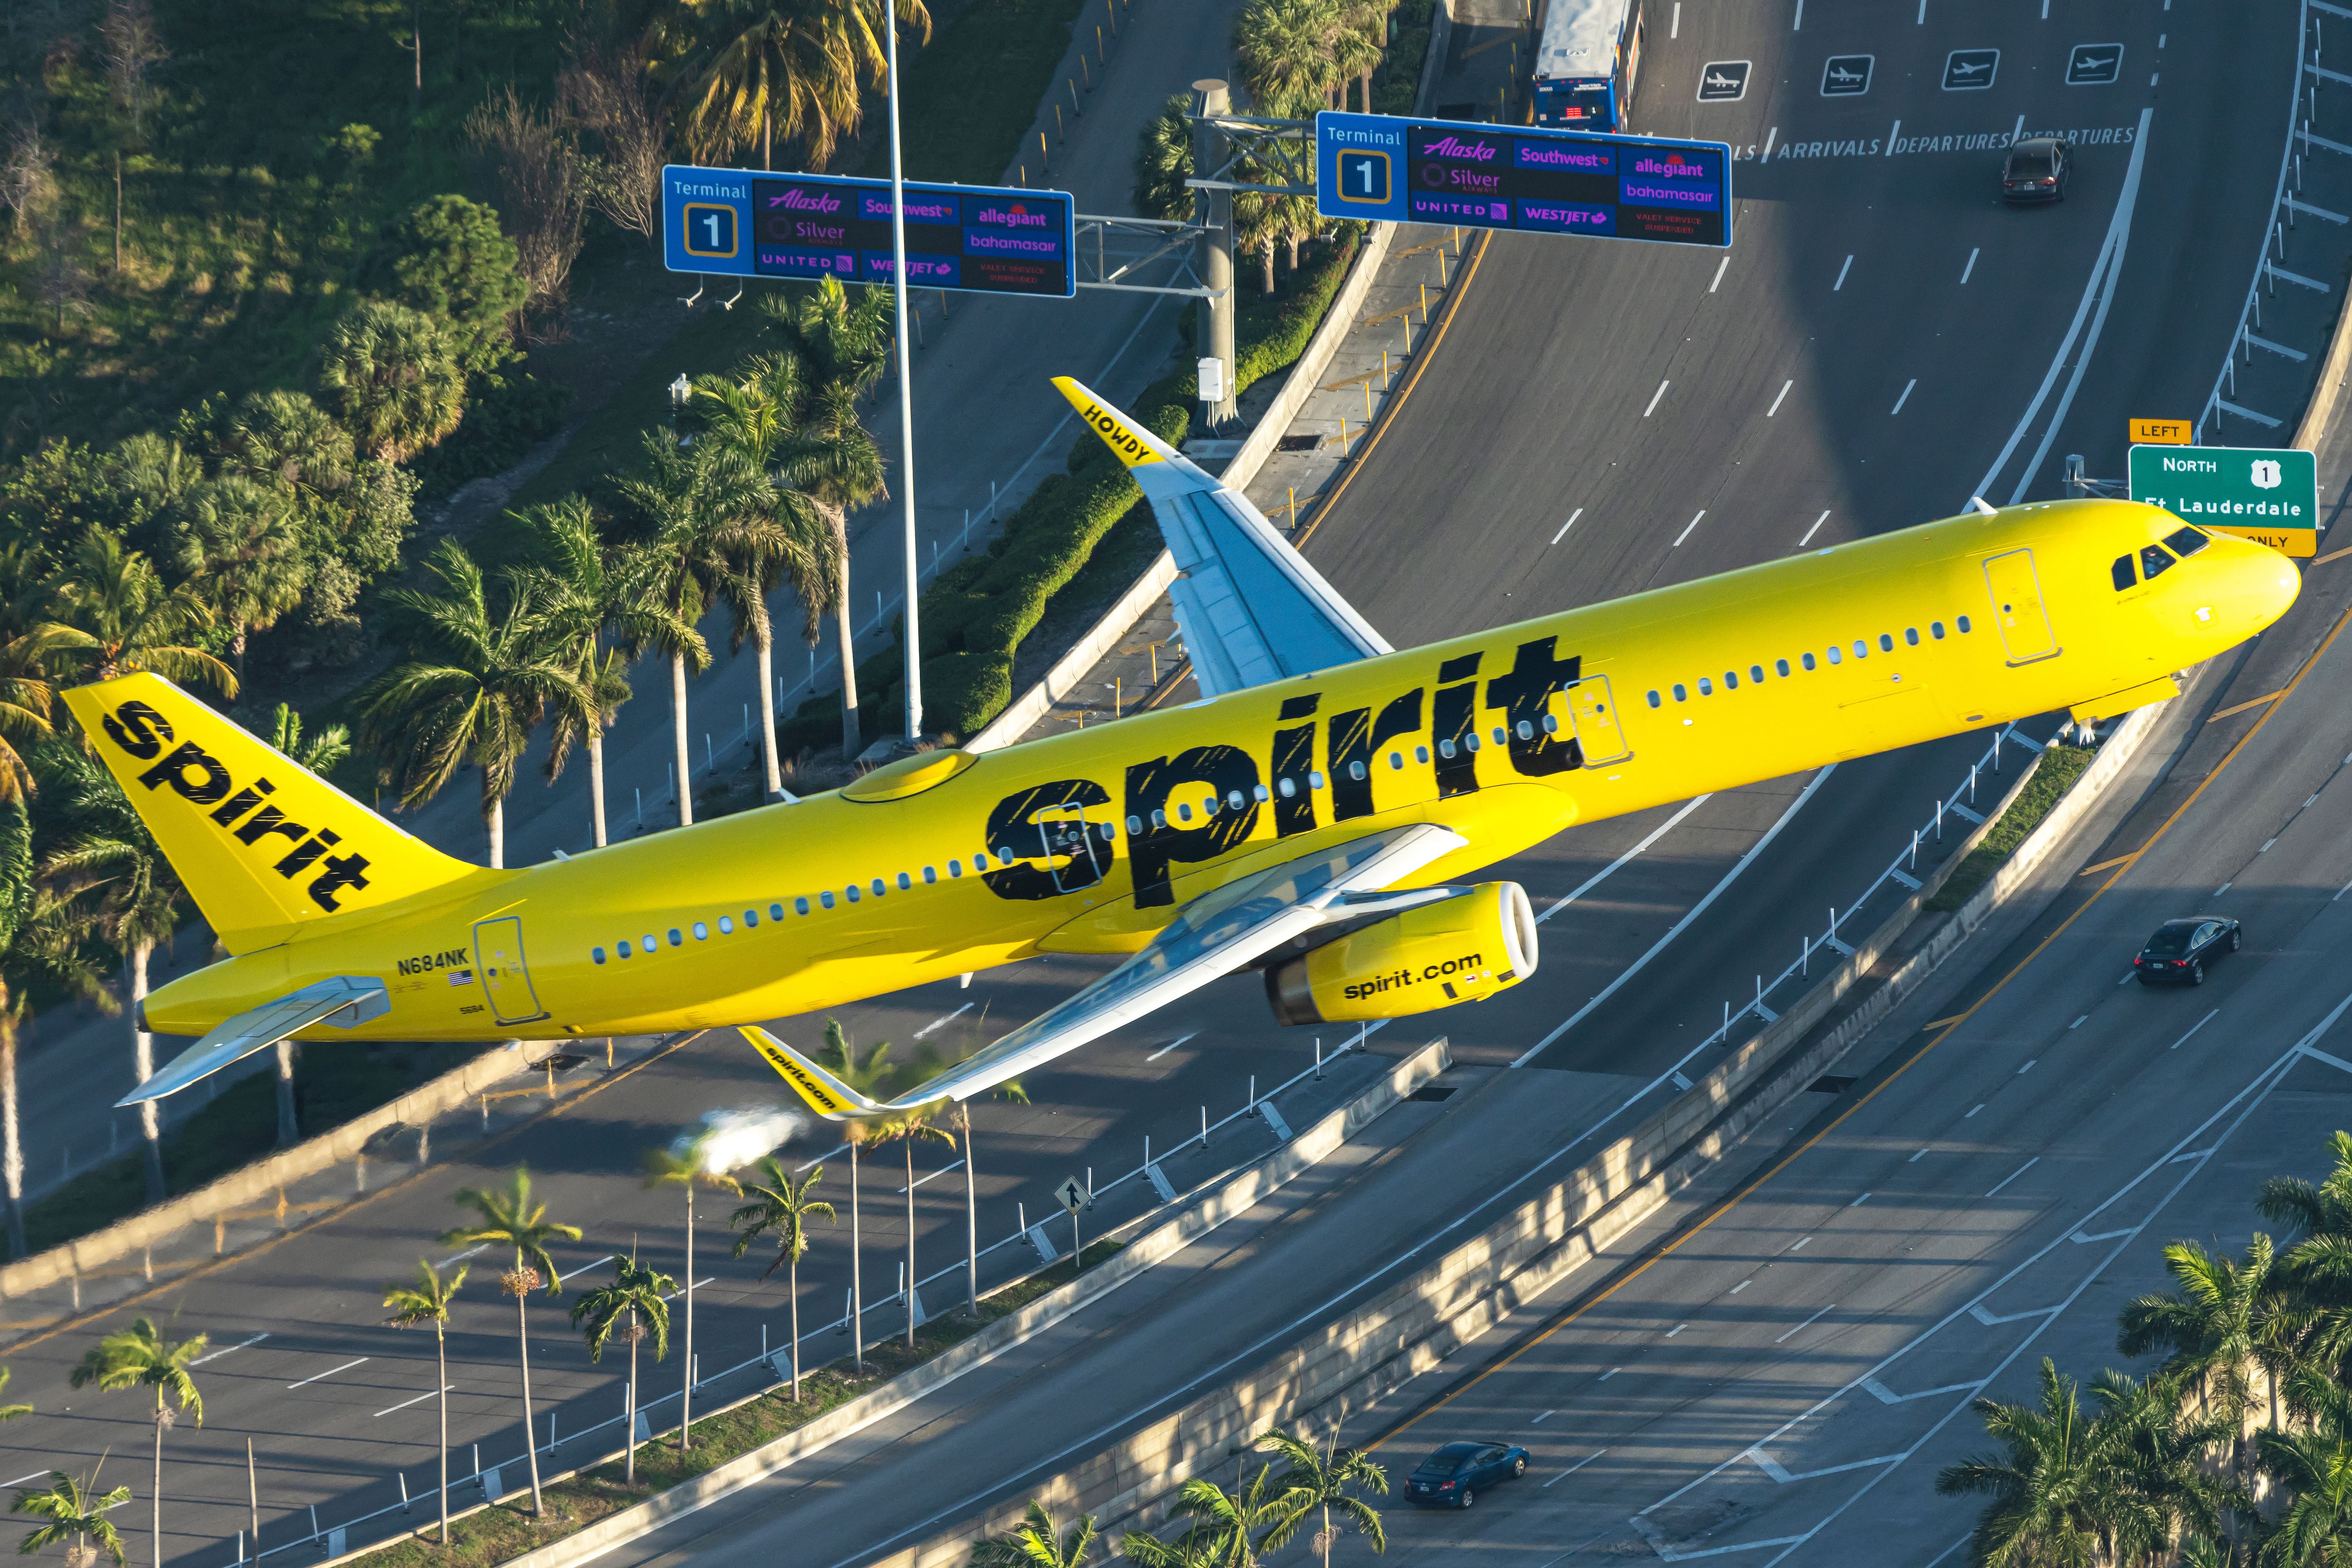 A Spirit Airlines Airbus A321-231 flying in the sky.